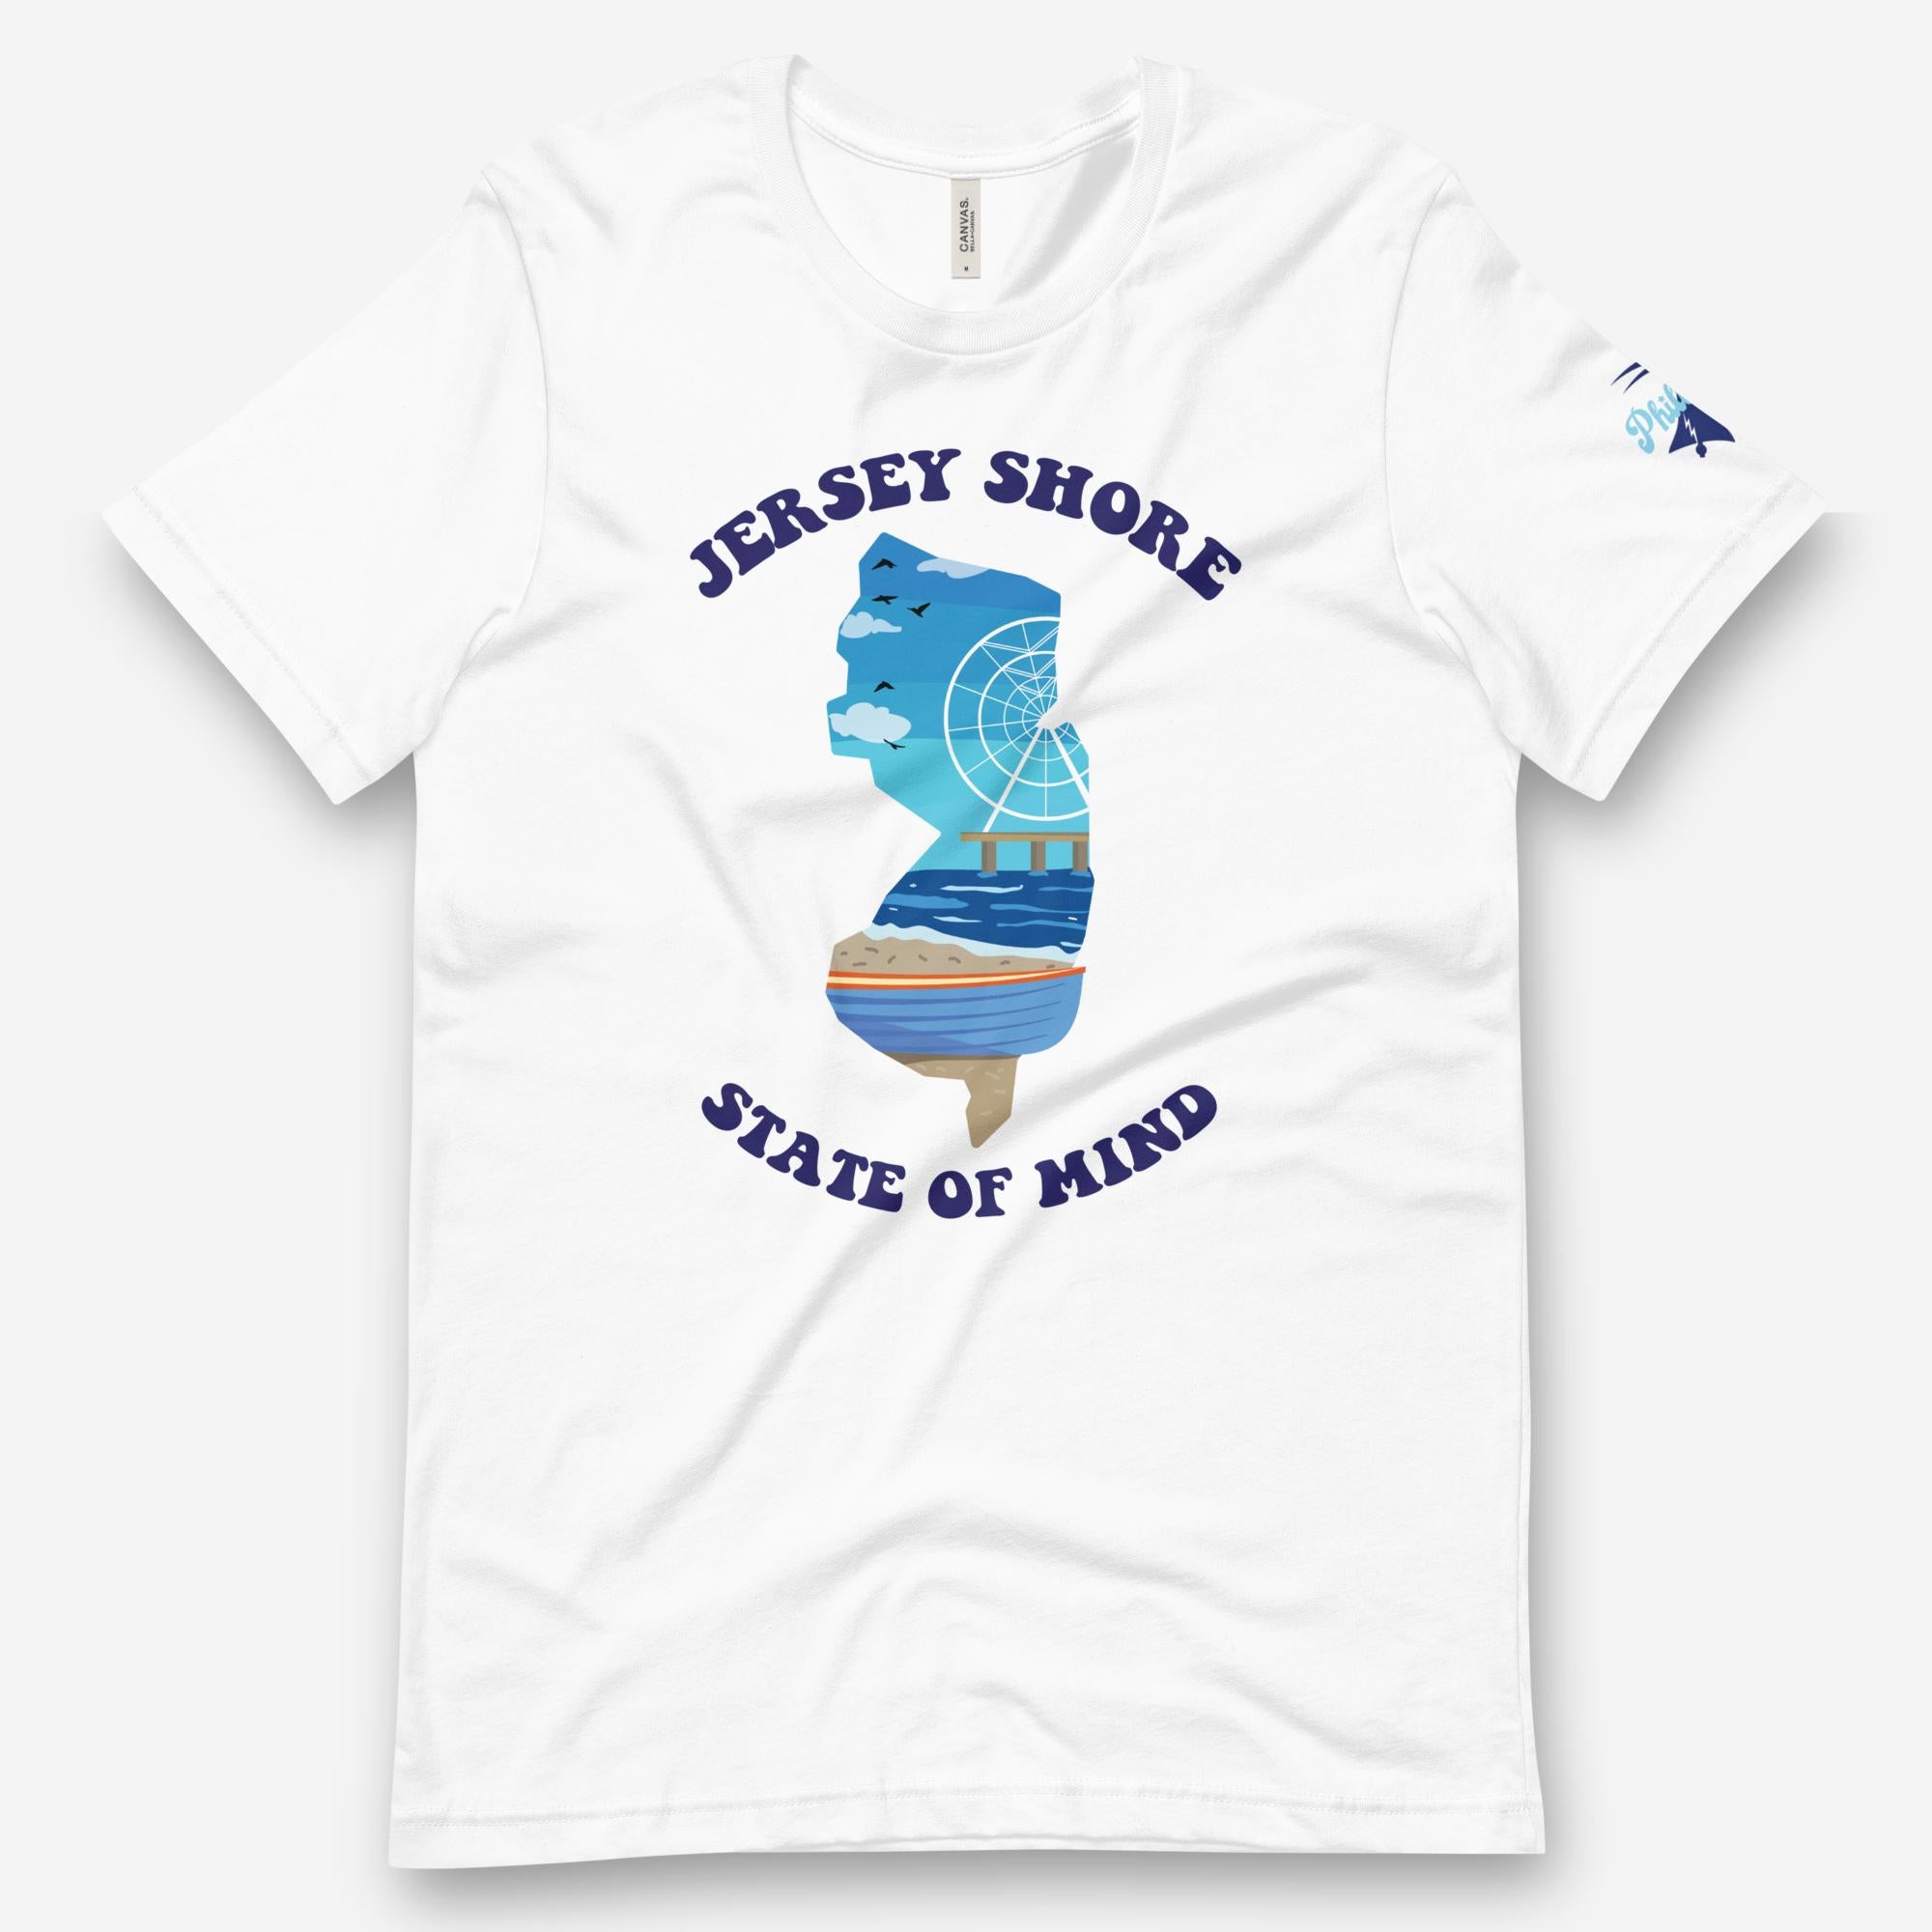 "Jersey Shore State of Mind" Tee